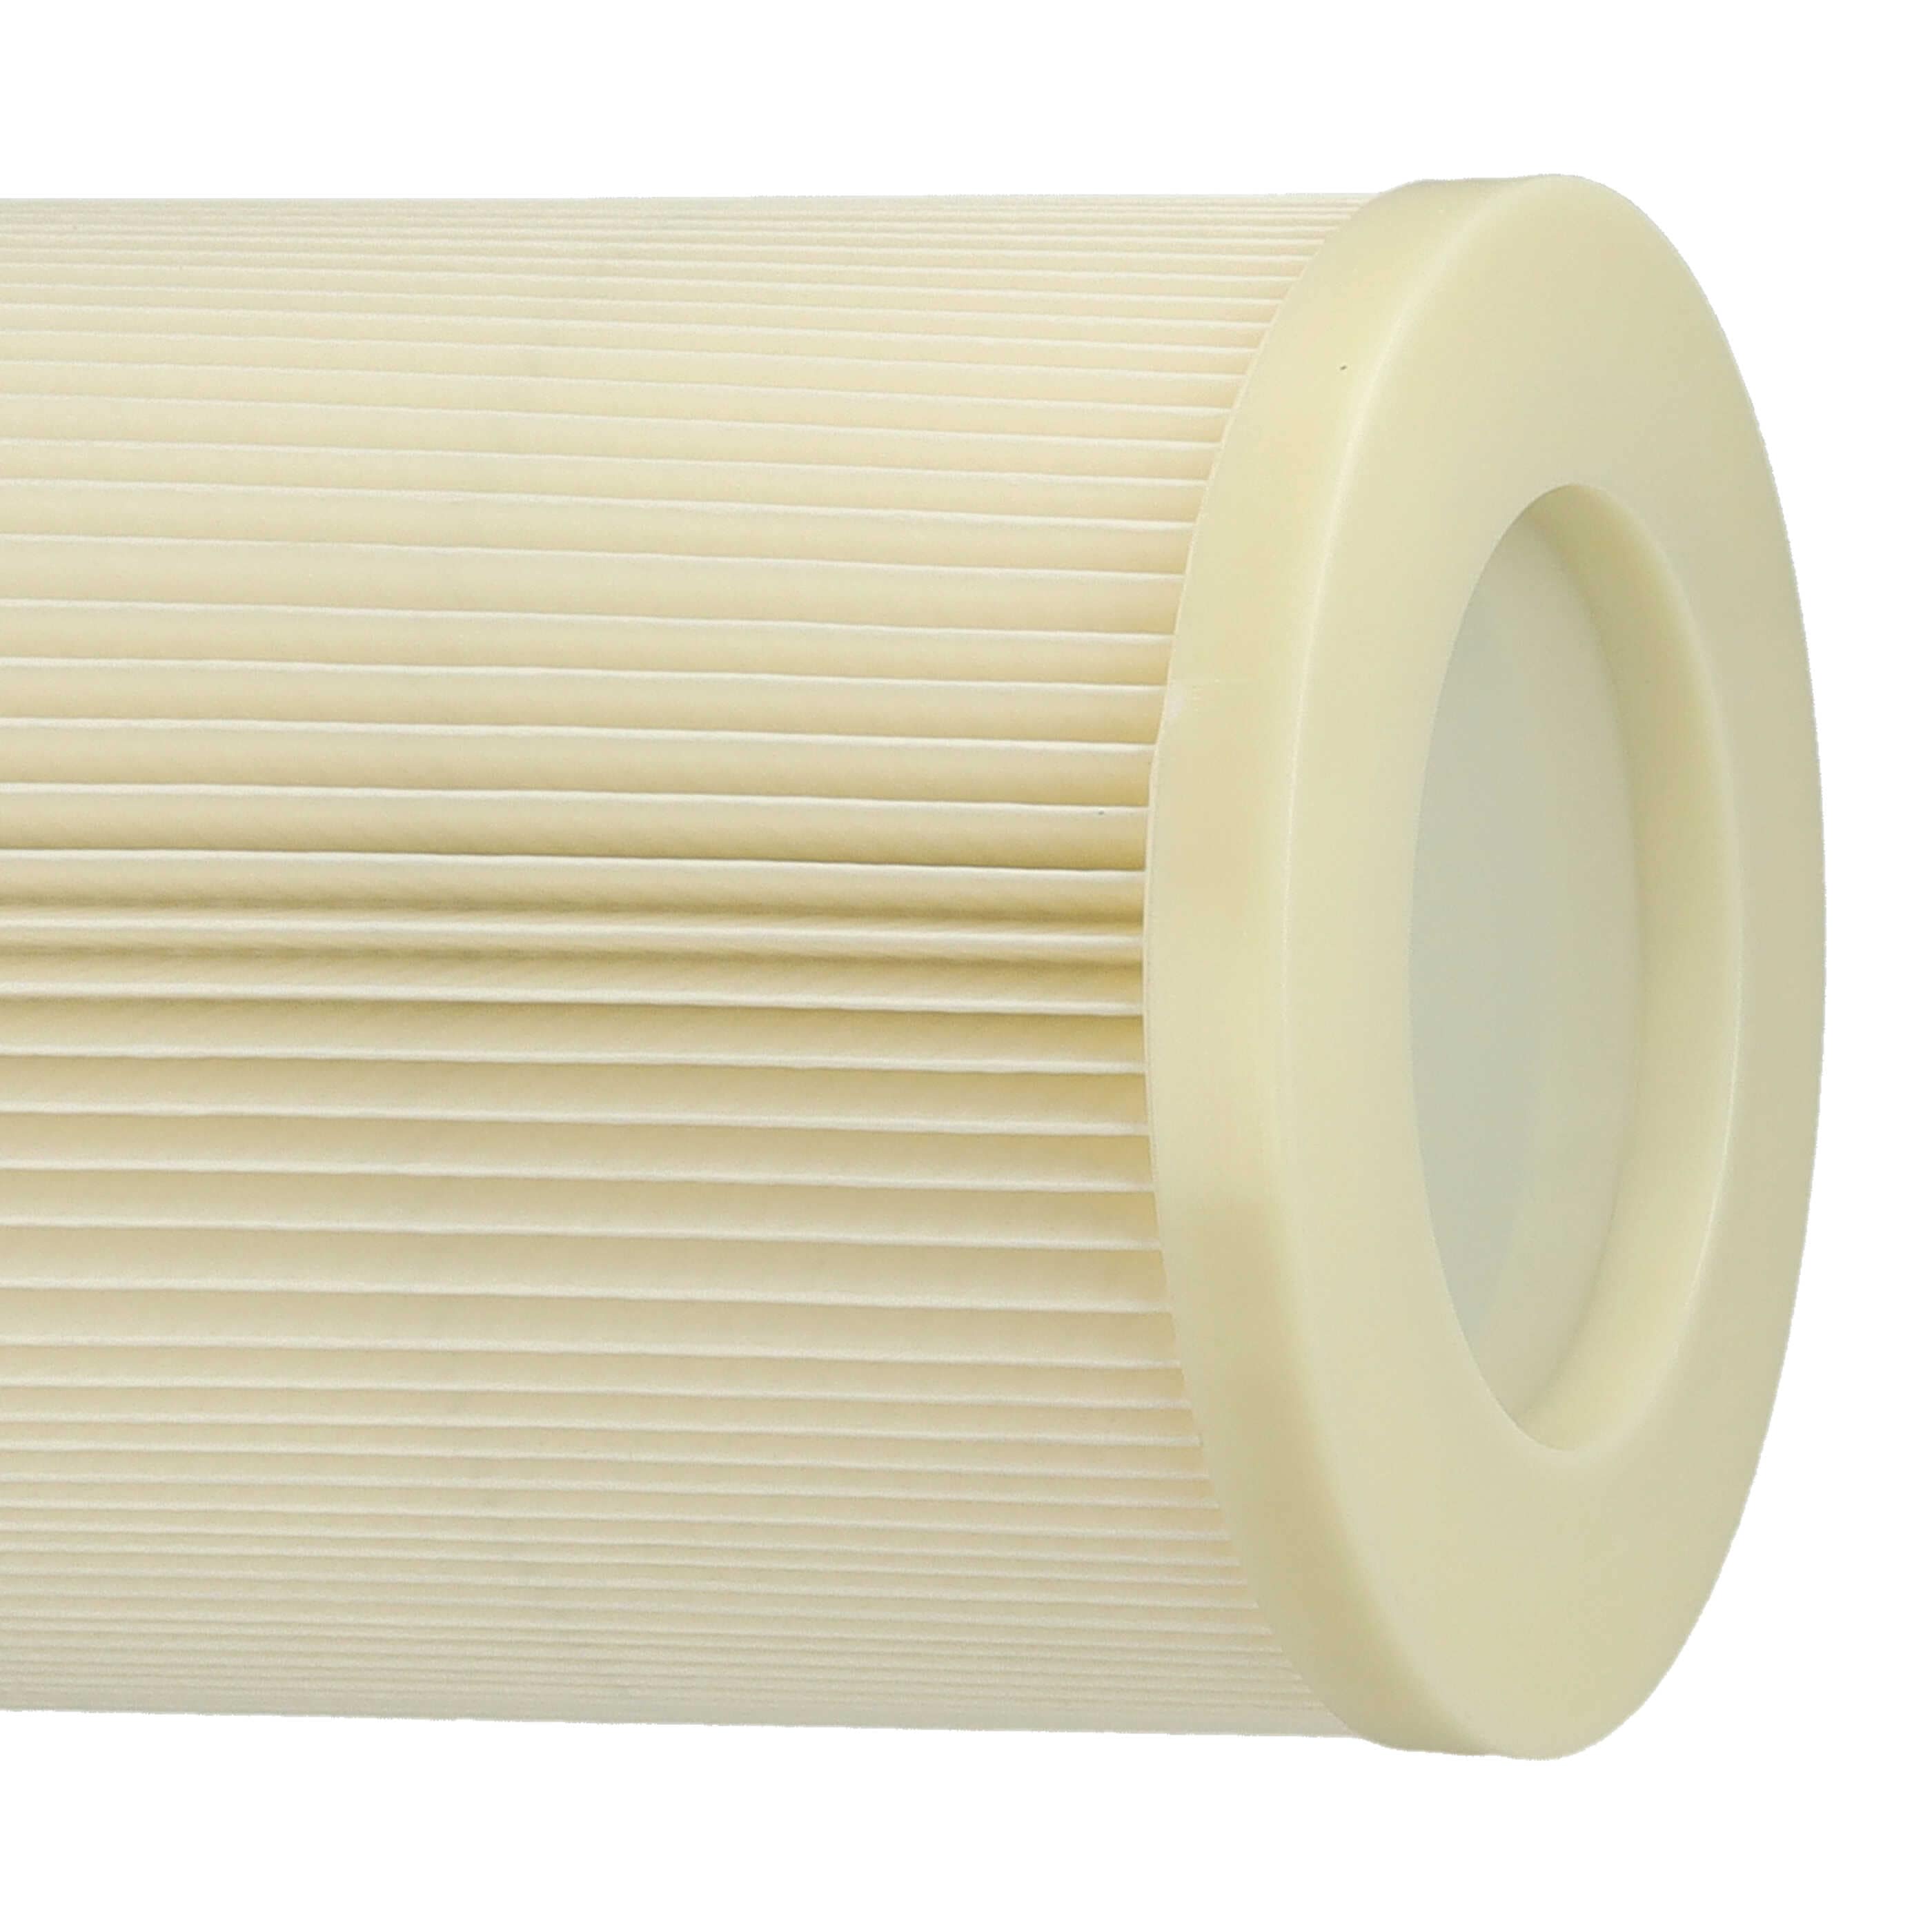 1x fine filter replaces Dustcontrol 42029 for DustcontrolVacuum Cleaner, white